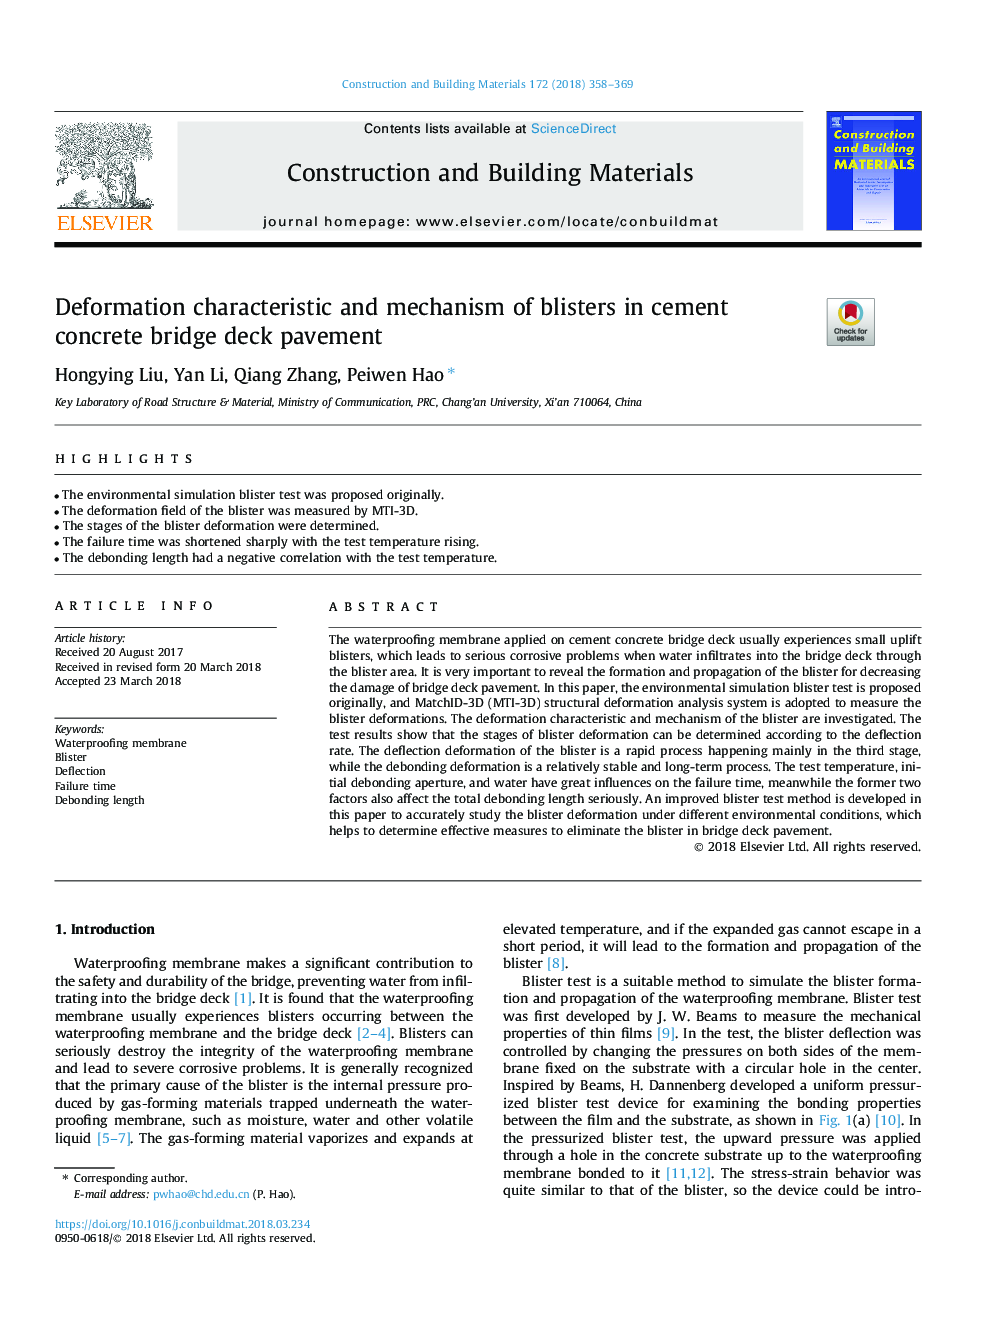 Deformation characteristic and mechanism of blisters in cement concrete bridge deck pavement